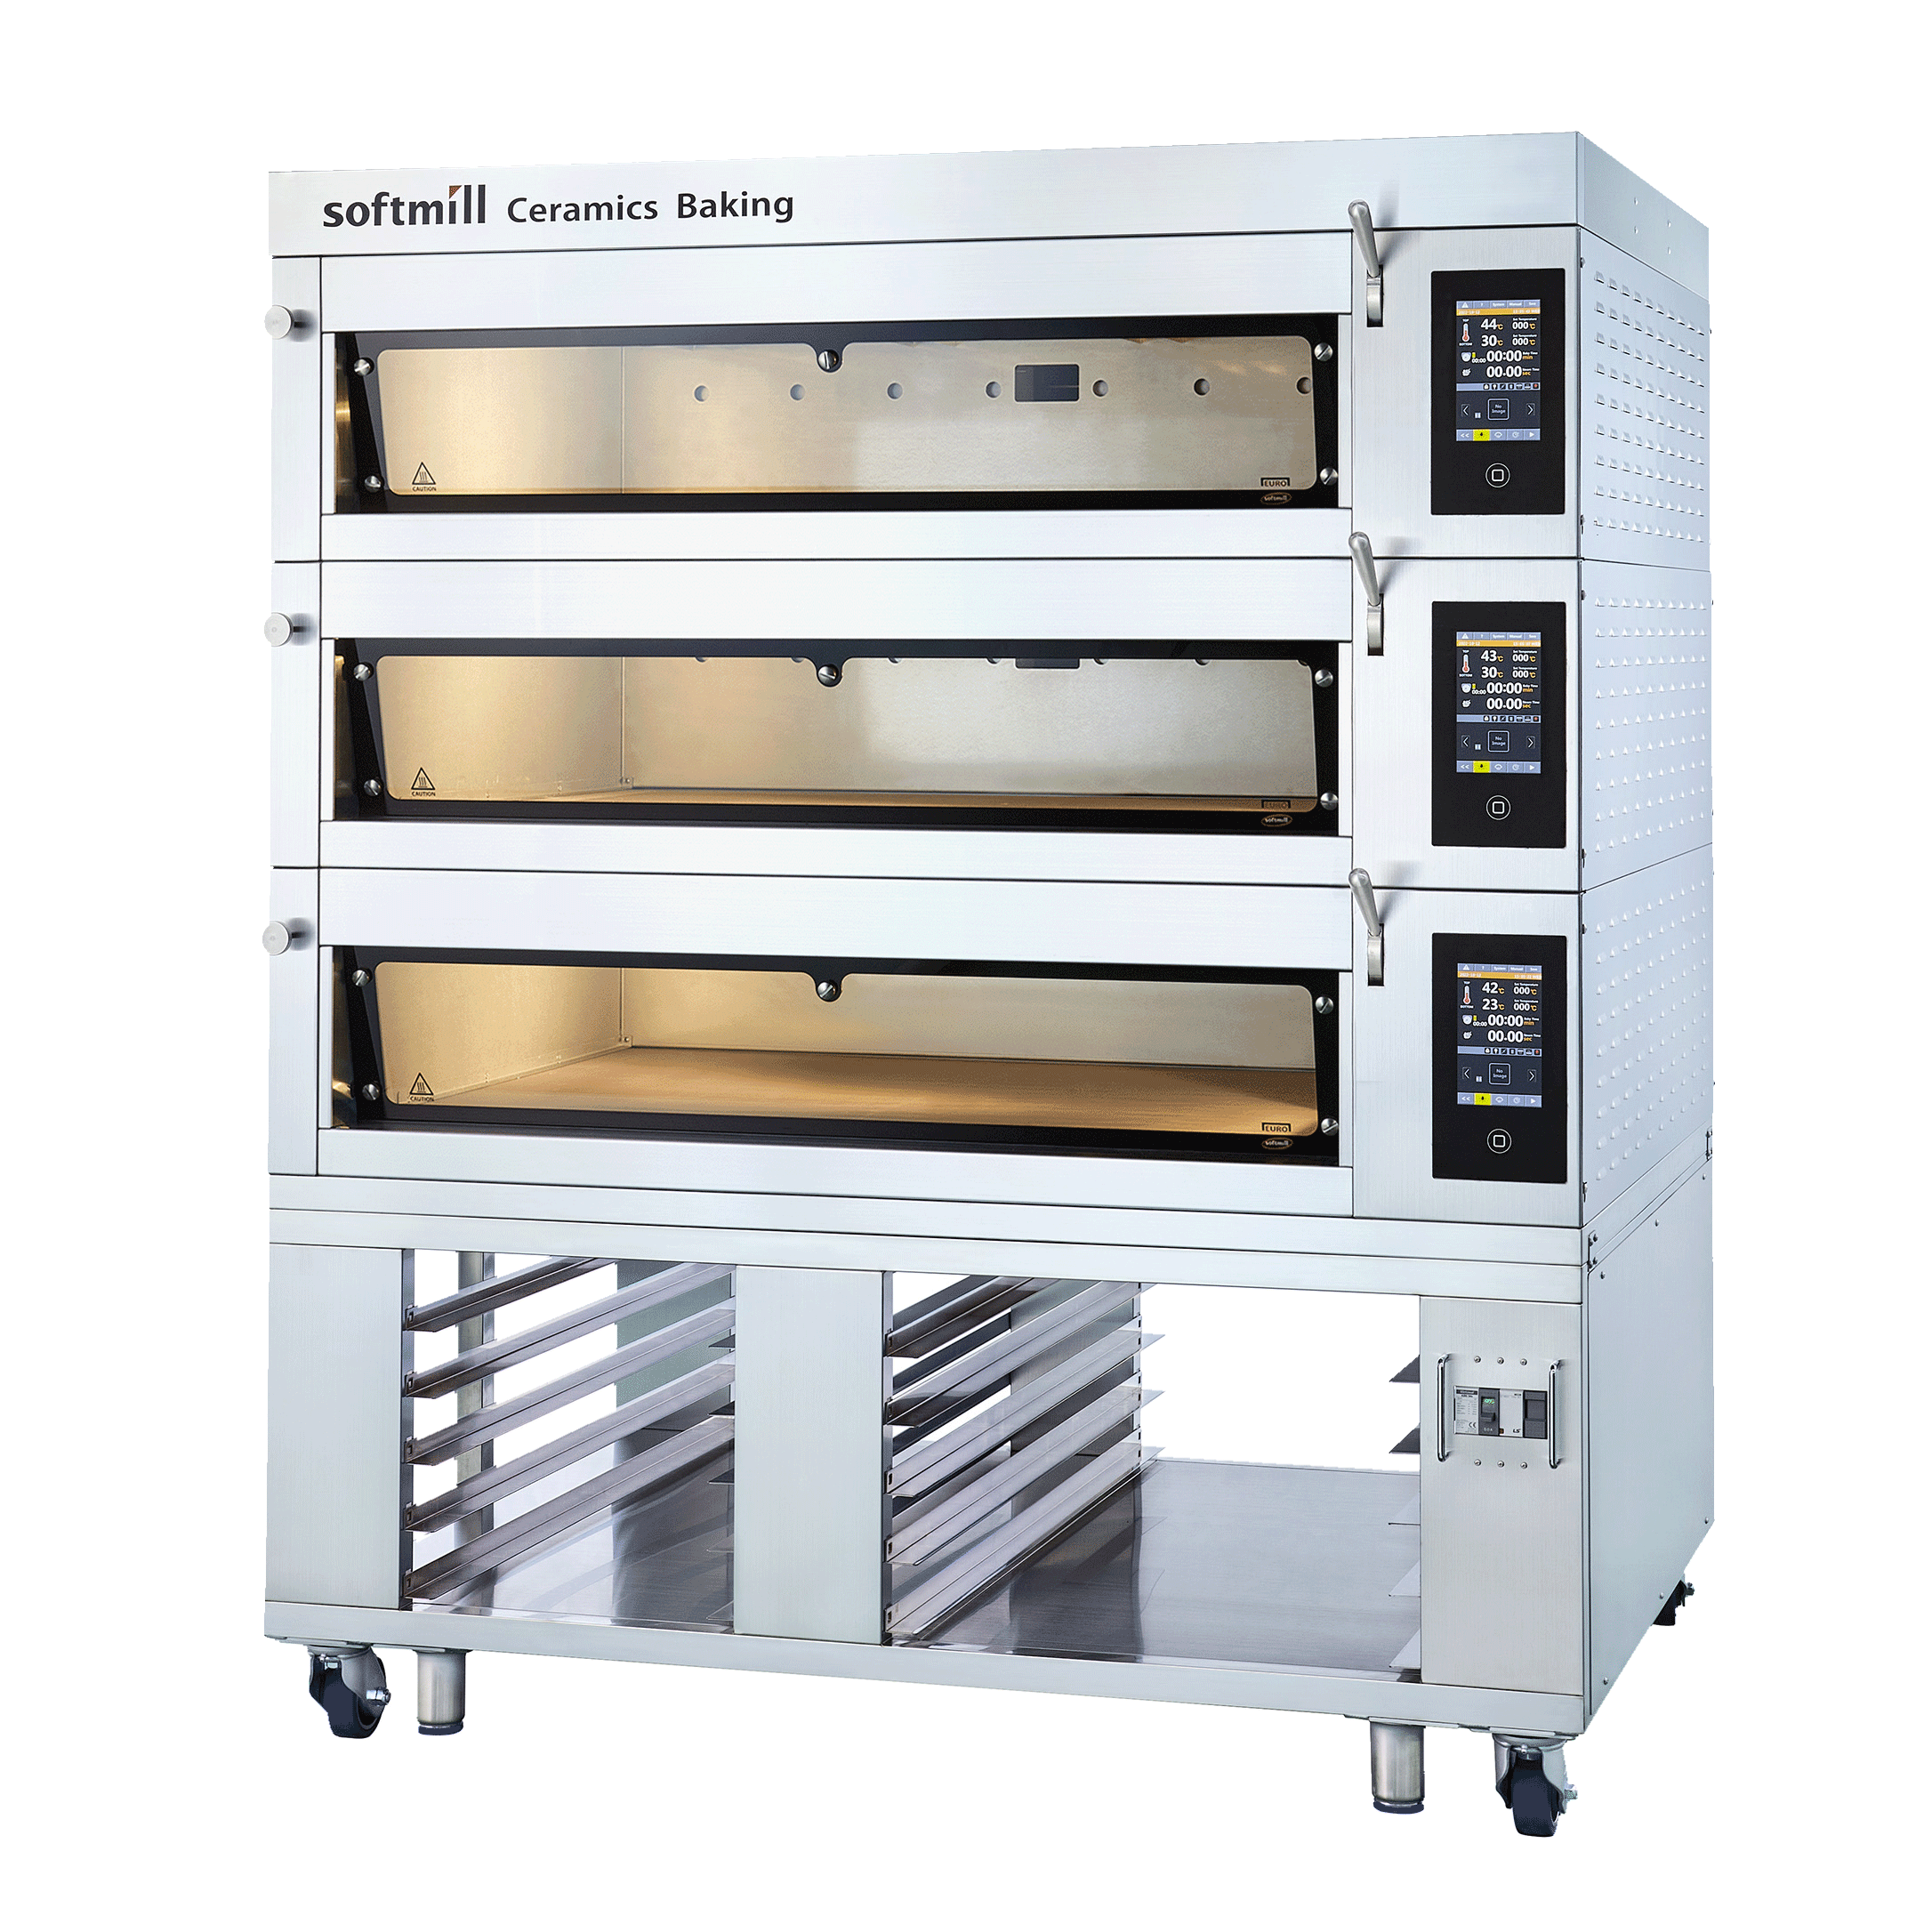 Euro-Baker Oven 4 trays 3 tiers size up images